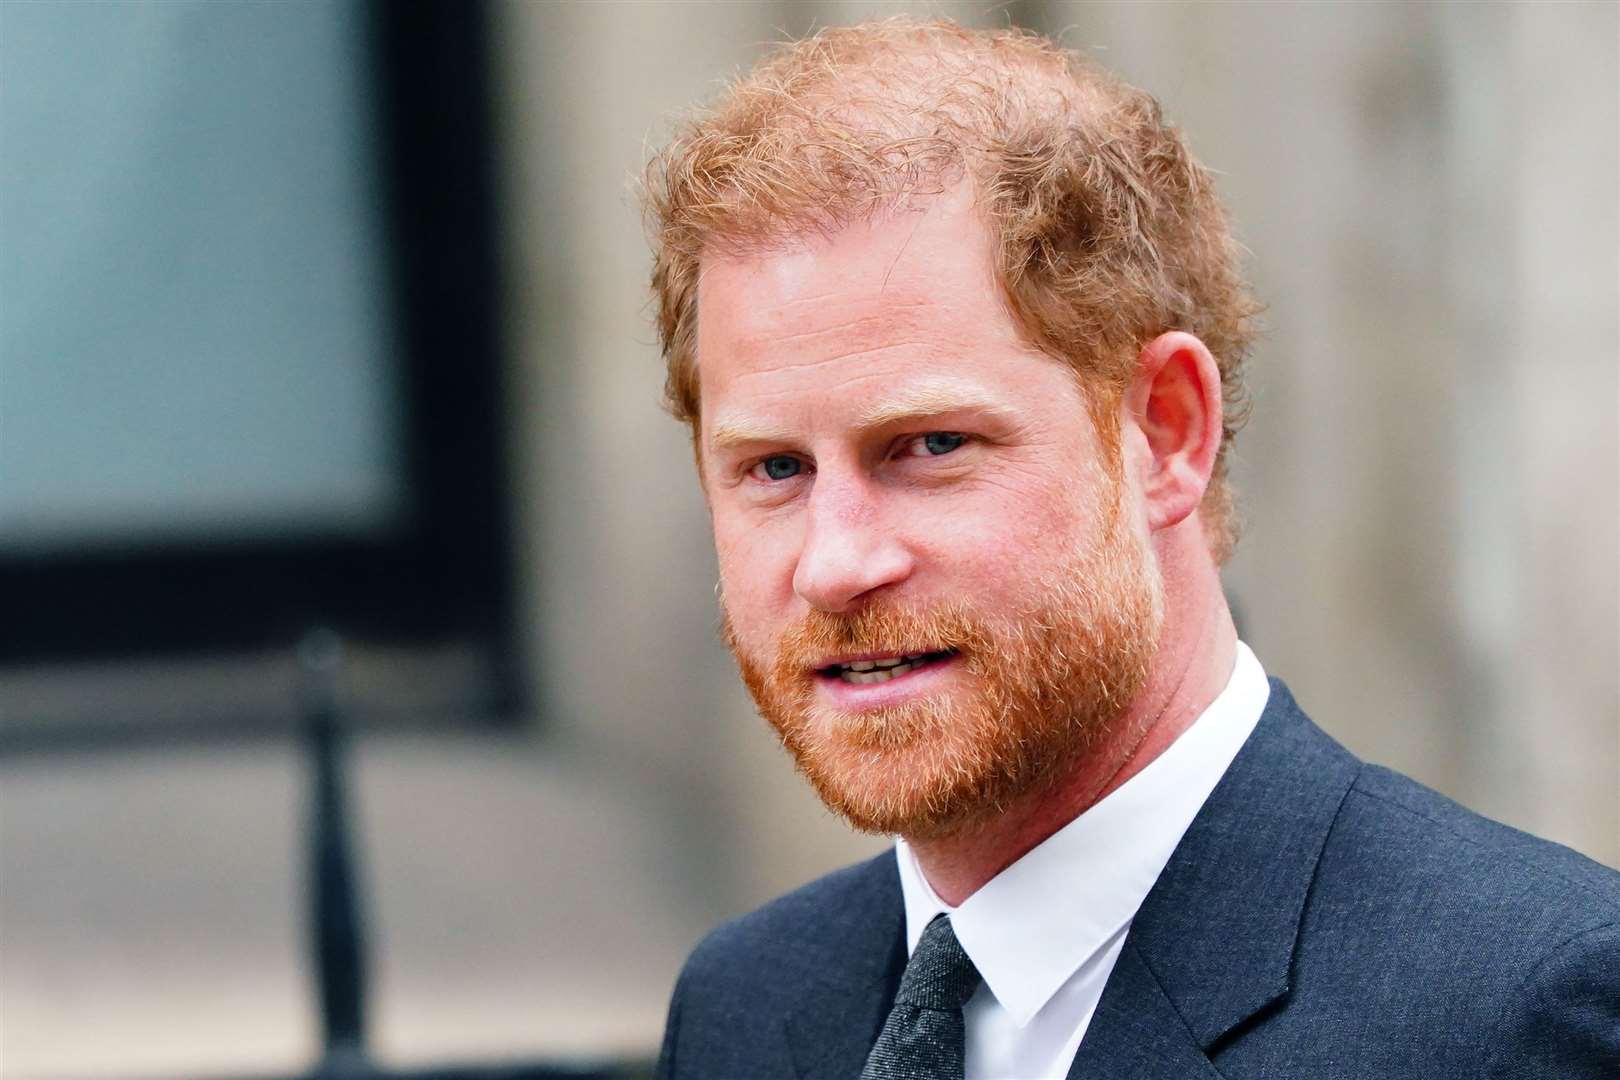 The Duke of Sussex has lost his initial bid to appeal against the decision (PA)